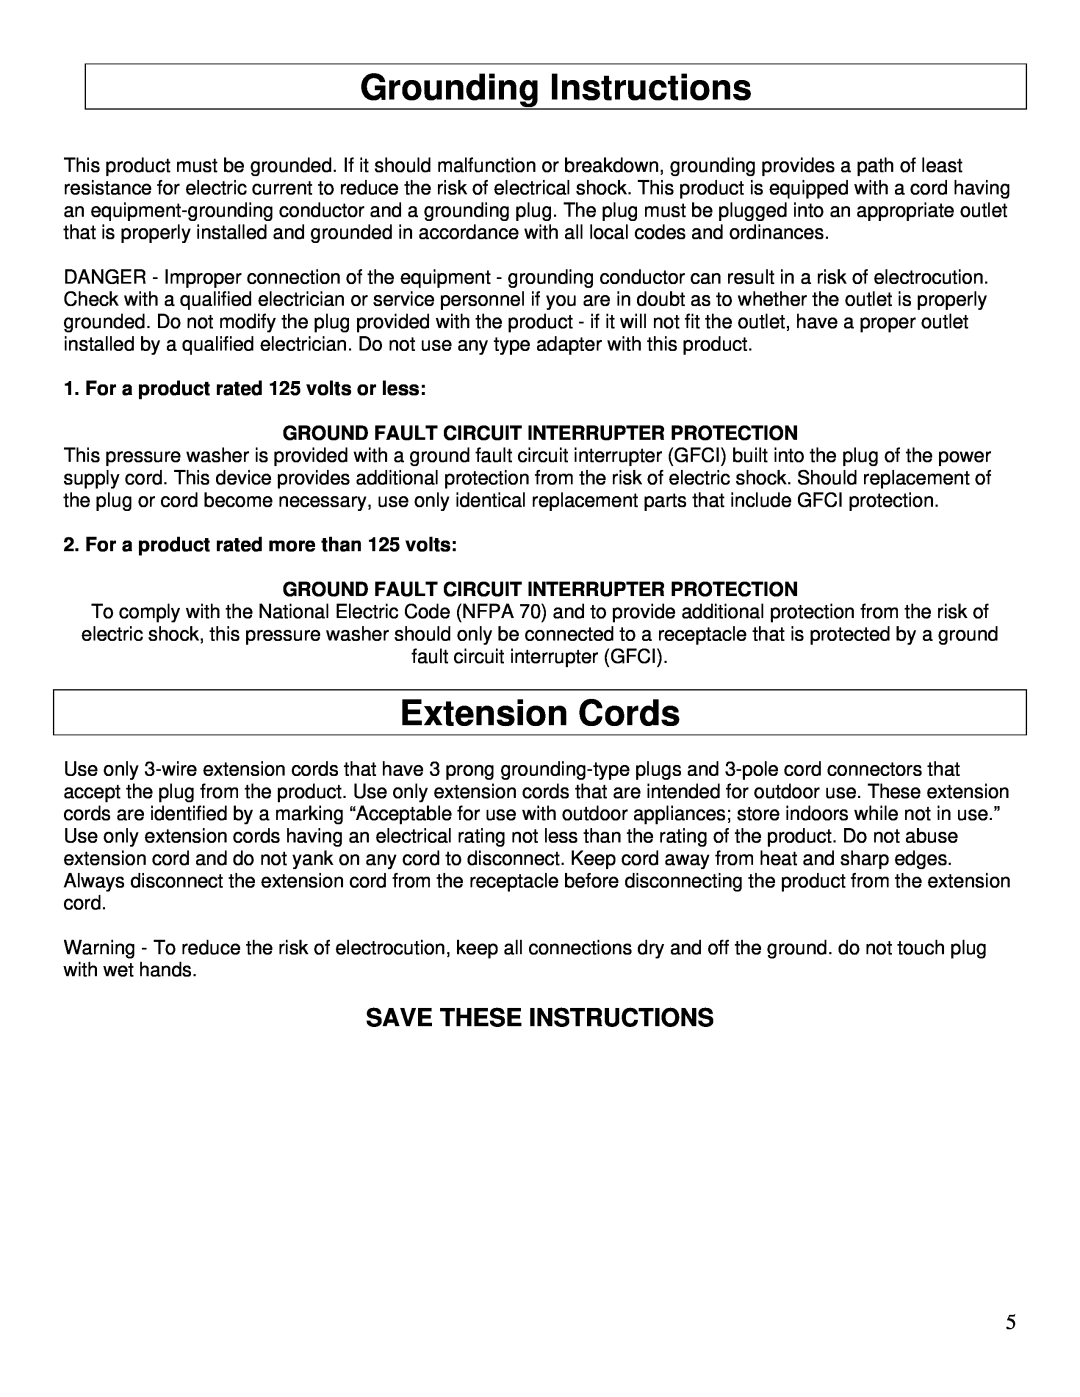 North Star M157300E owner manual Grounding Instructions, Extension Cords, Save These Instructions 